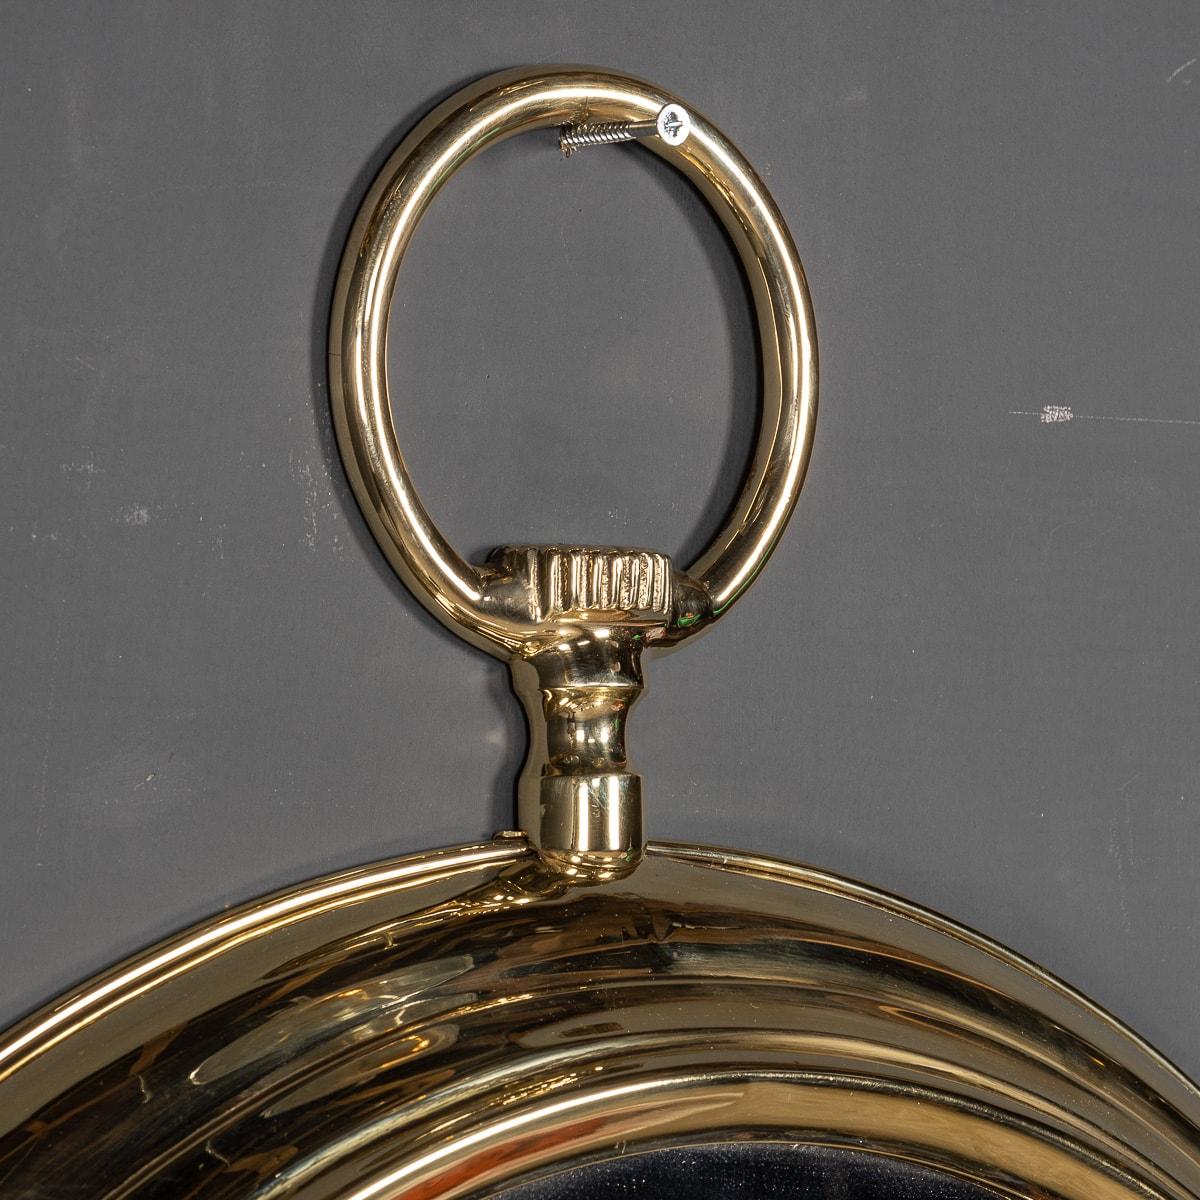 Brass 20th Century Striking Collection Of Pocket Watch Shaped Mirrors, c.1950-1970